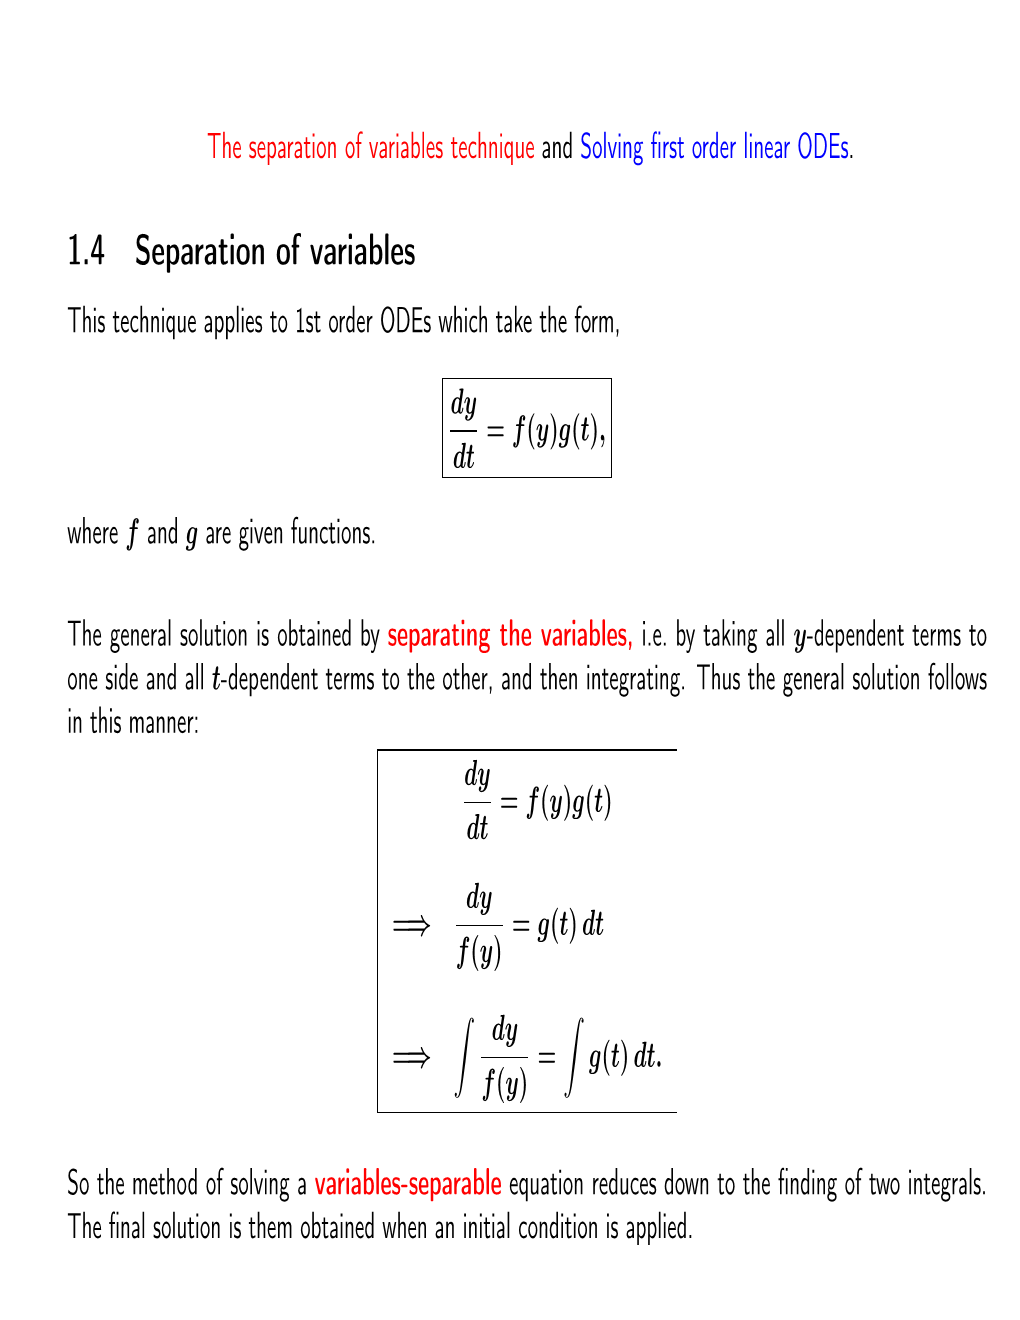 1.4 Separation of Variables This Technique Applies to 1St Order Odes Which Take the Form